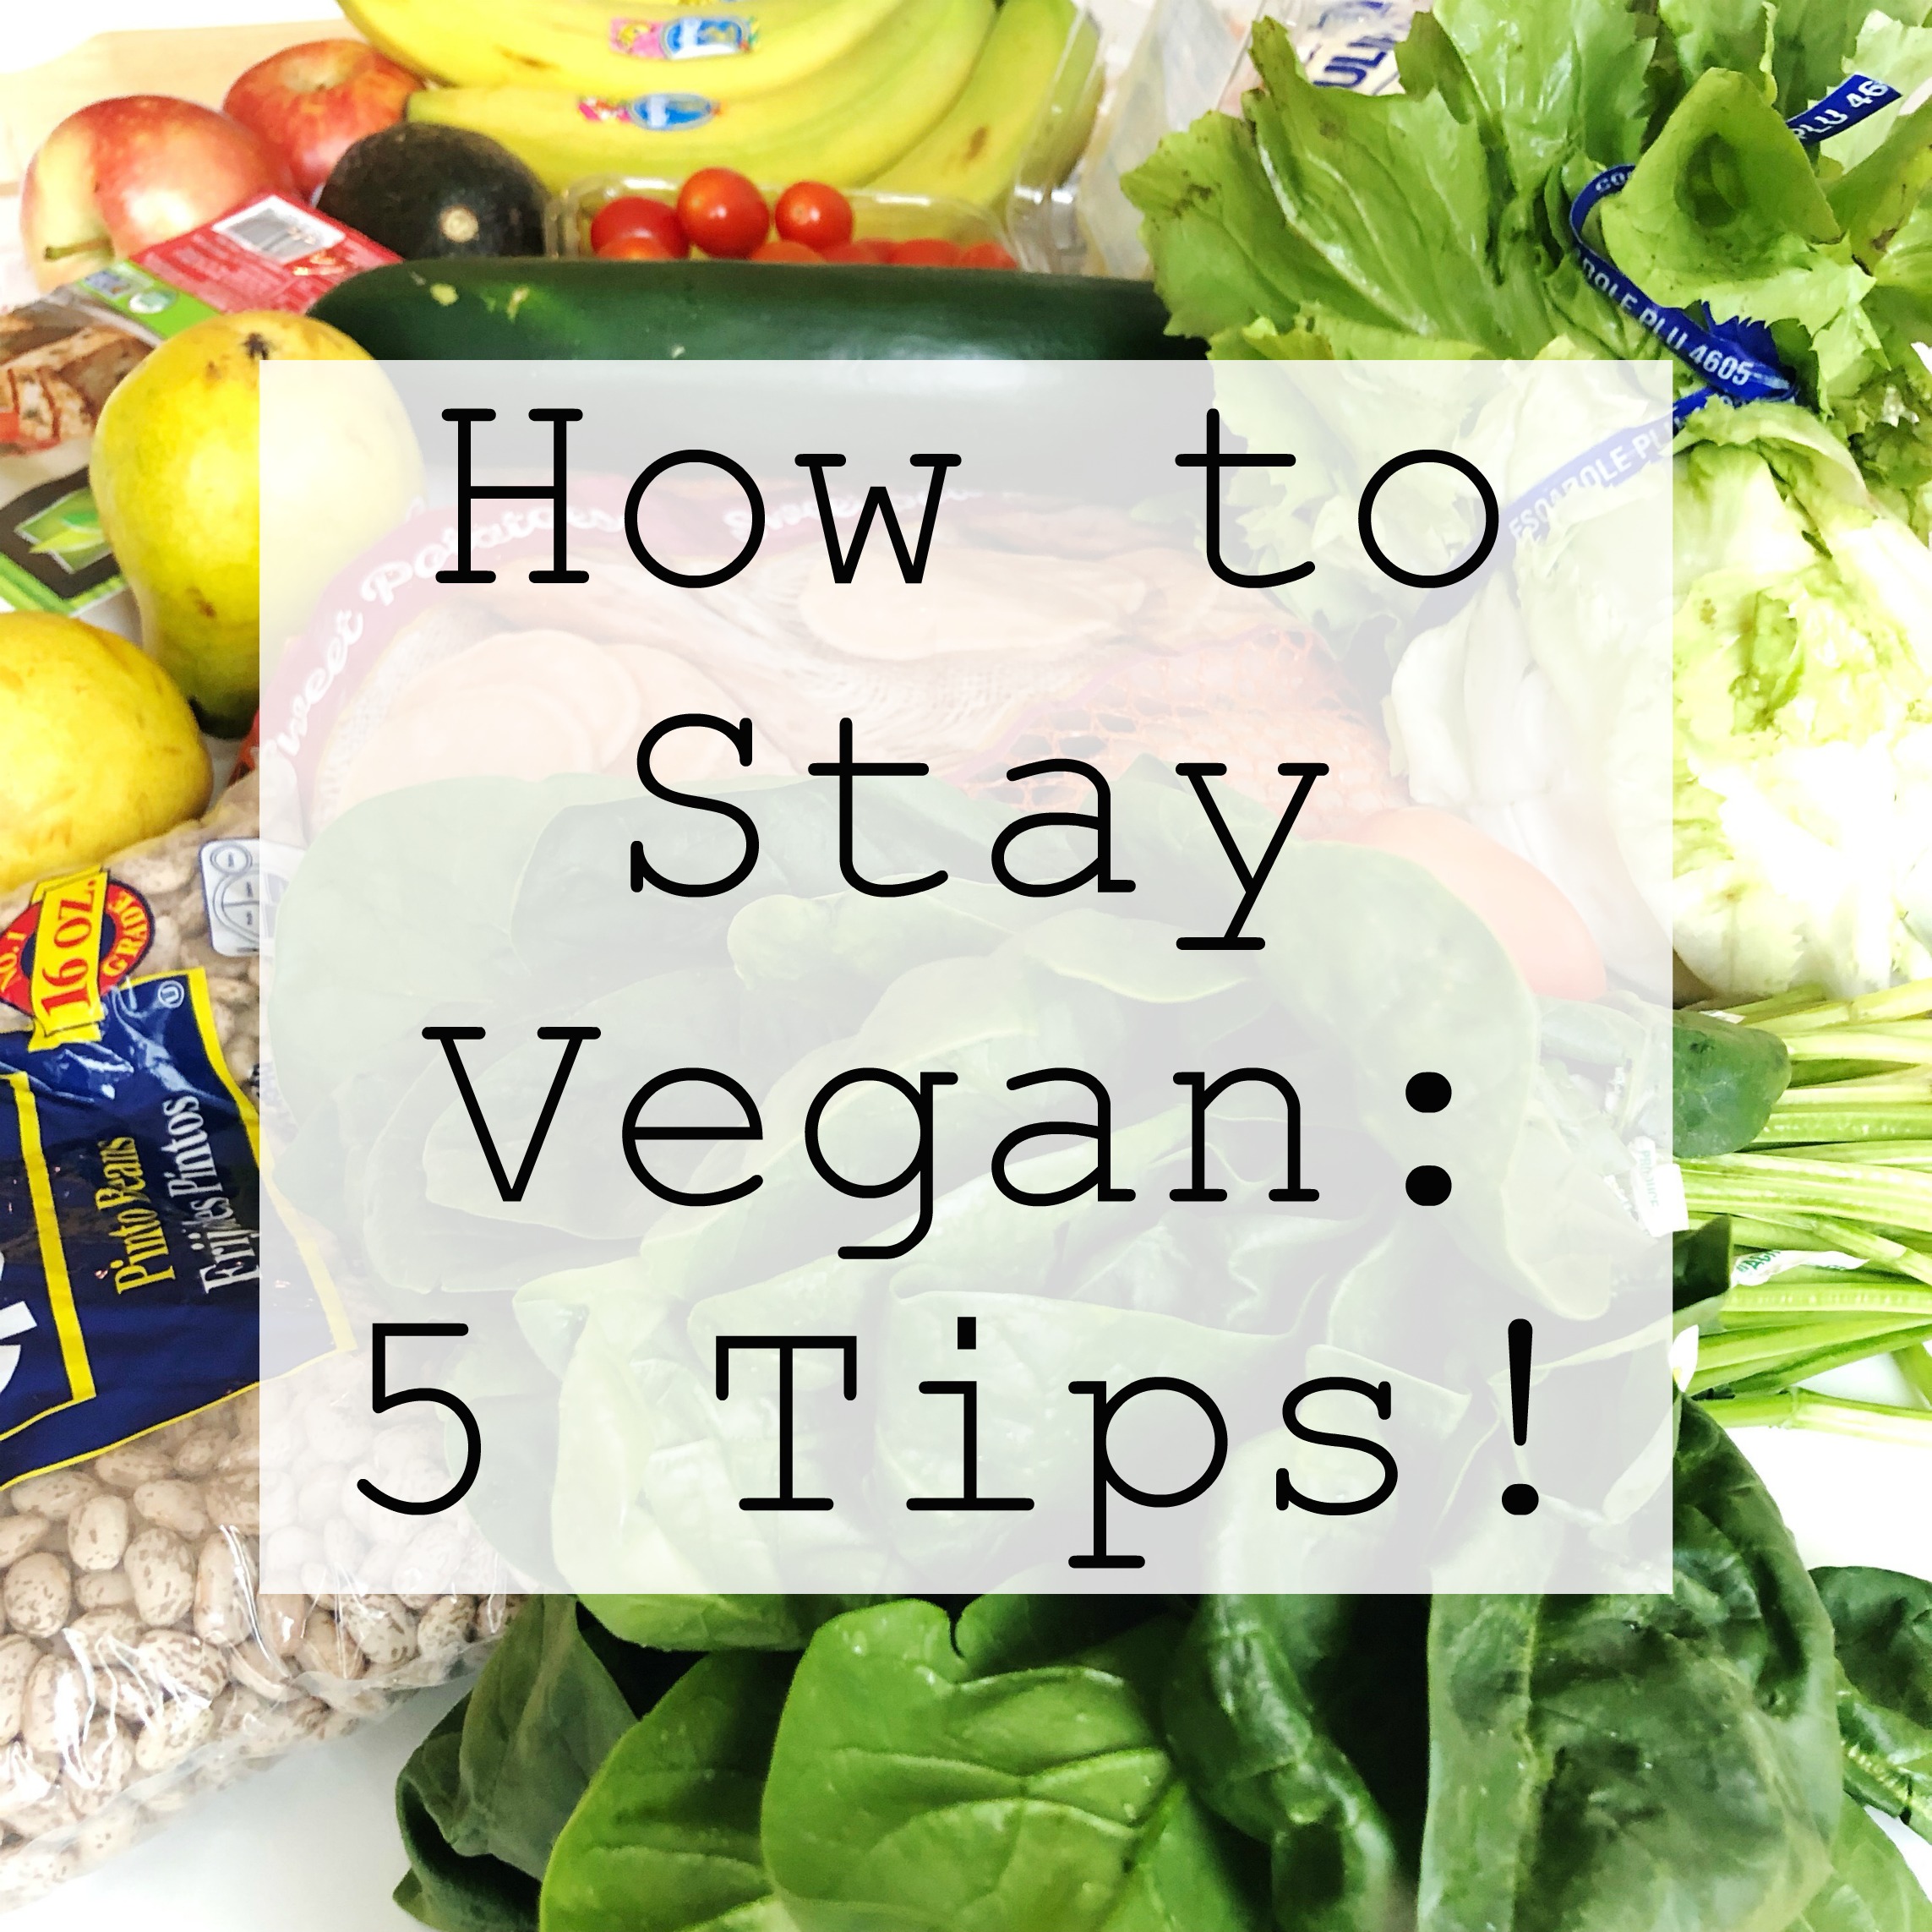 How to Stay Vegan: 5 Tips